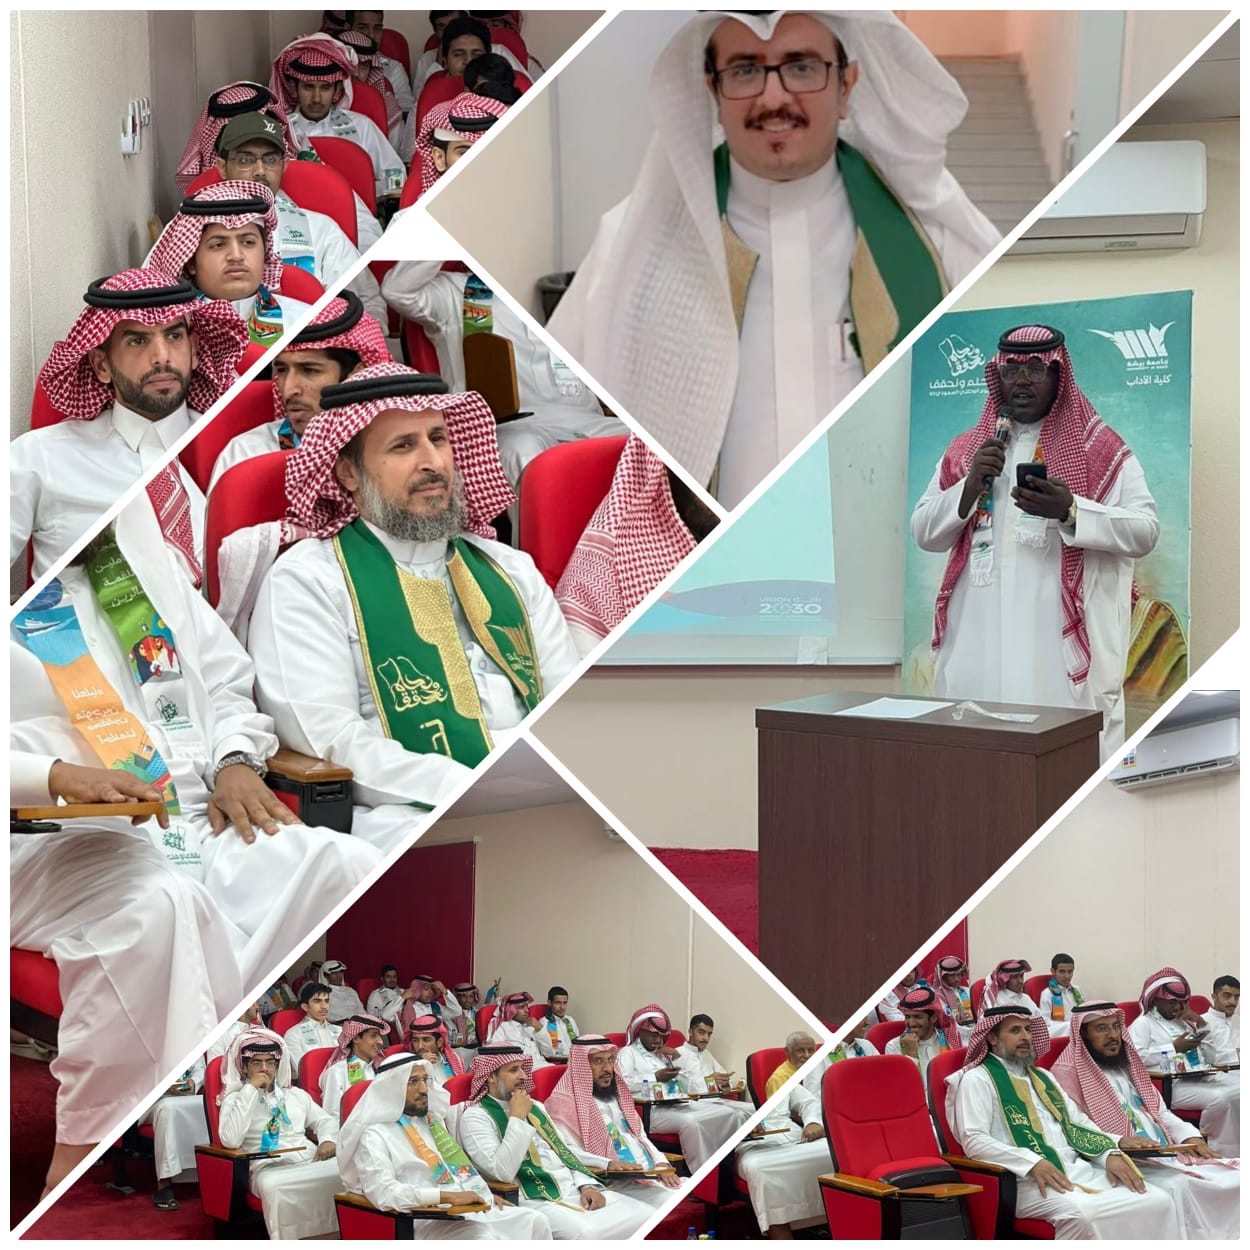 The Saudi national anthem is sung at the College of Arts to celebrate the 93rd National Day